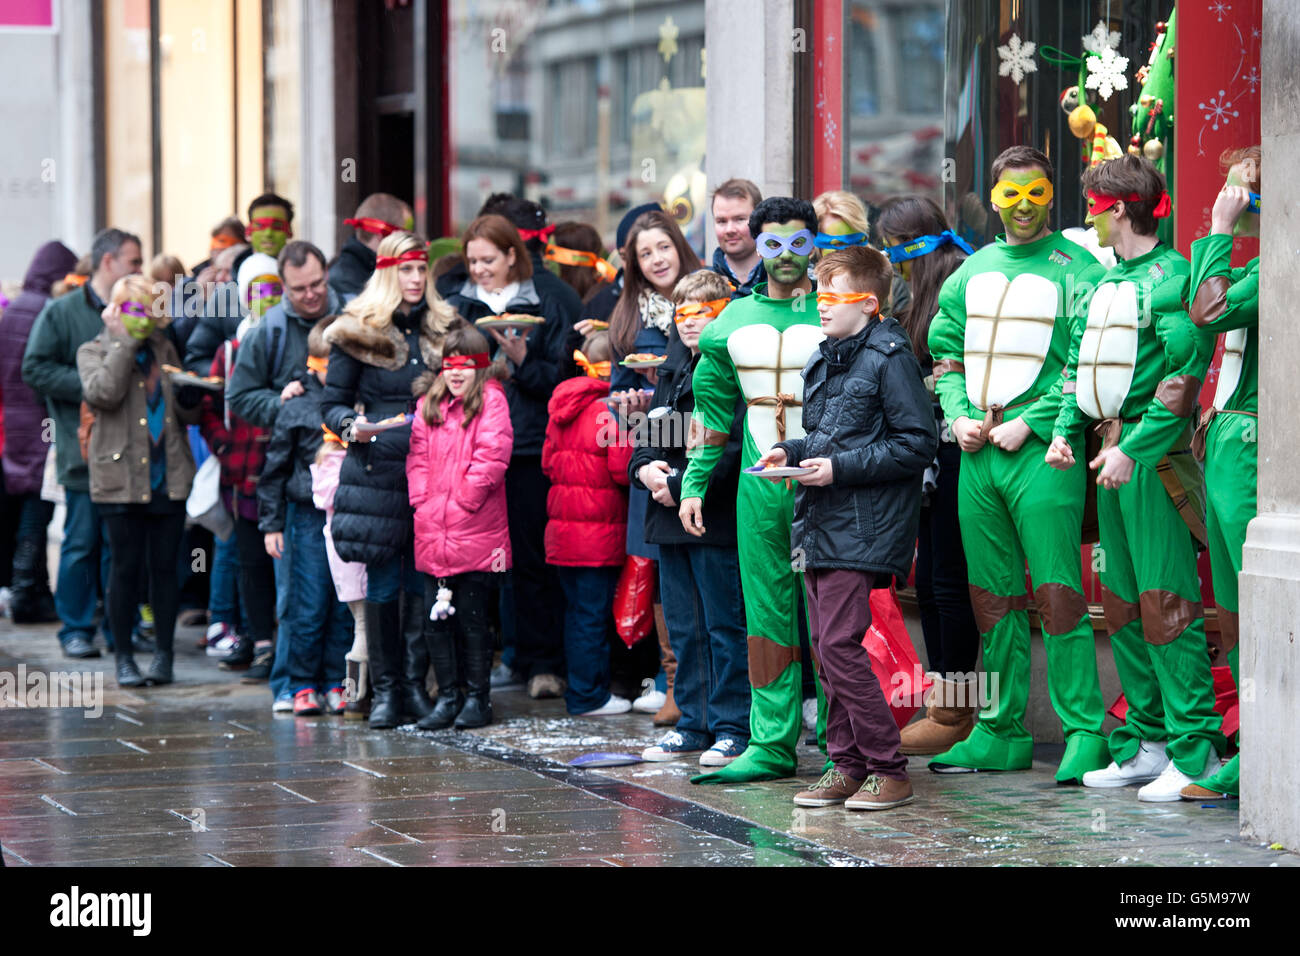 s Regent Street for the exclusive early launch of the new Teenage Mutant Ninja Turtles action figure collection, which for one day only includes a limited edition Night Shadow Leonardo figure. PRESS ASSOCIATION Photo. Picture date: Saturday, November 24, 2012. Following the exclusive special event, the new Turtles toys will launch nationwide on 1 December, just in time for Christmas. Photo credit should read: Matt Crossick/PA Wire Stock Photo